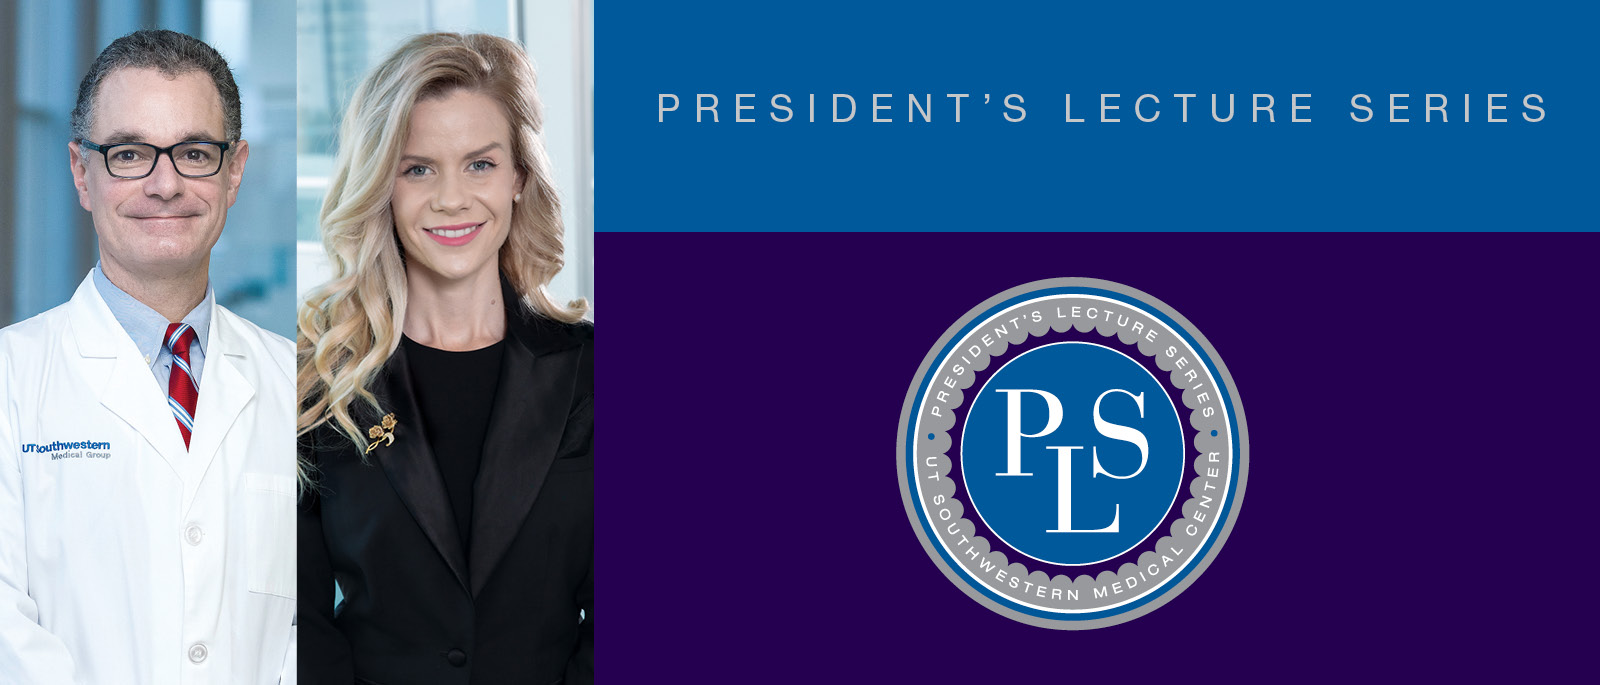 President's Lecture Series with photo of man in white lab coat and woman in black suit jacket